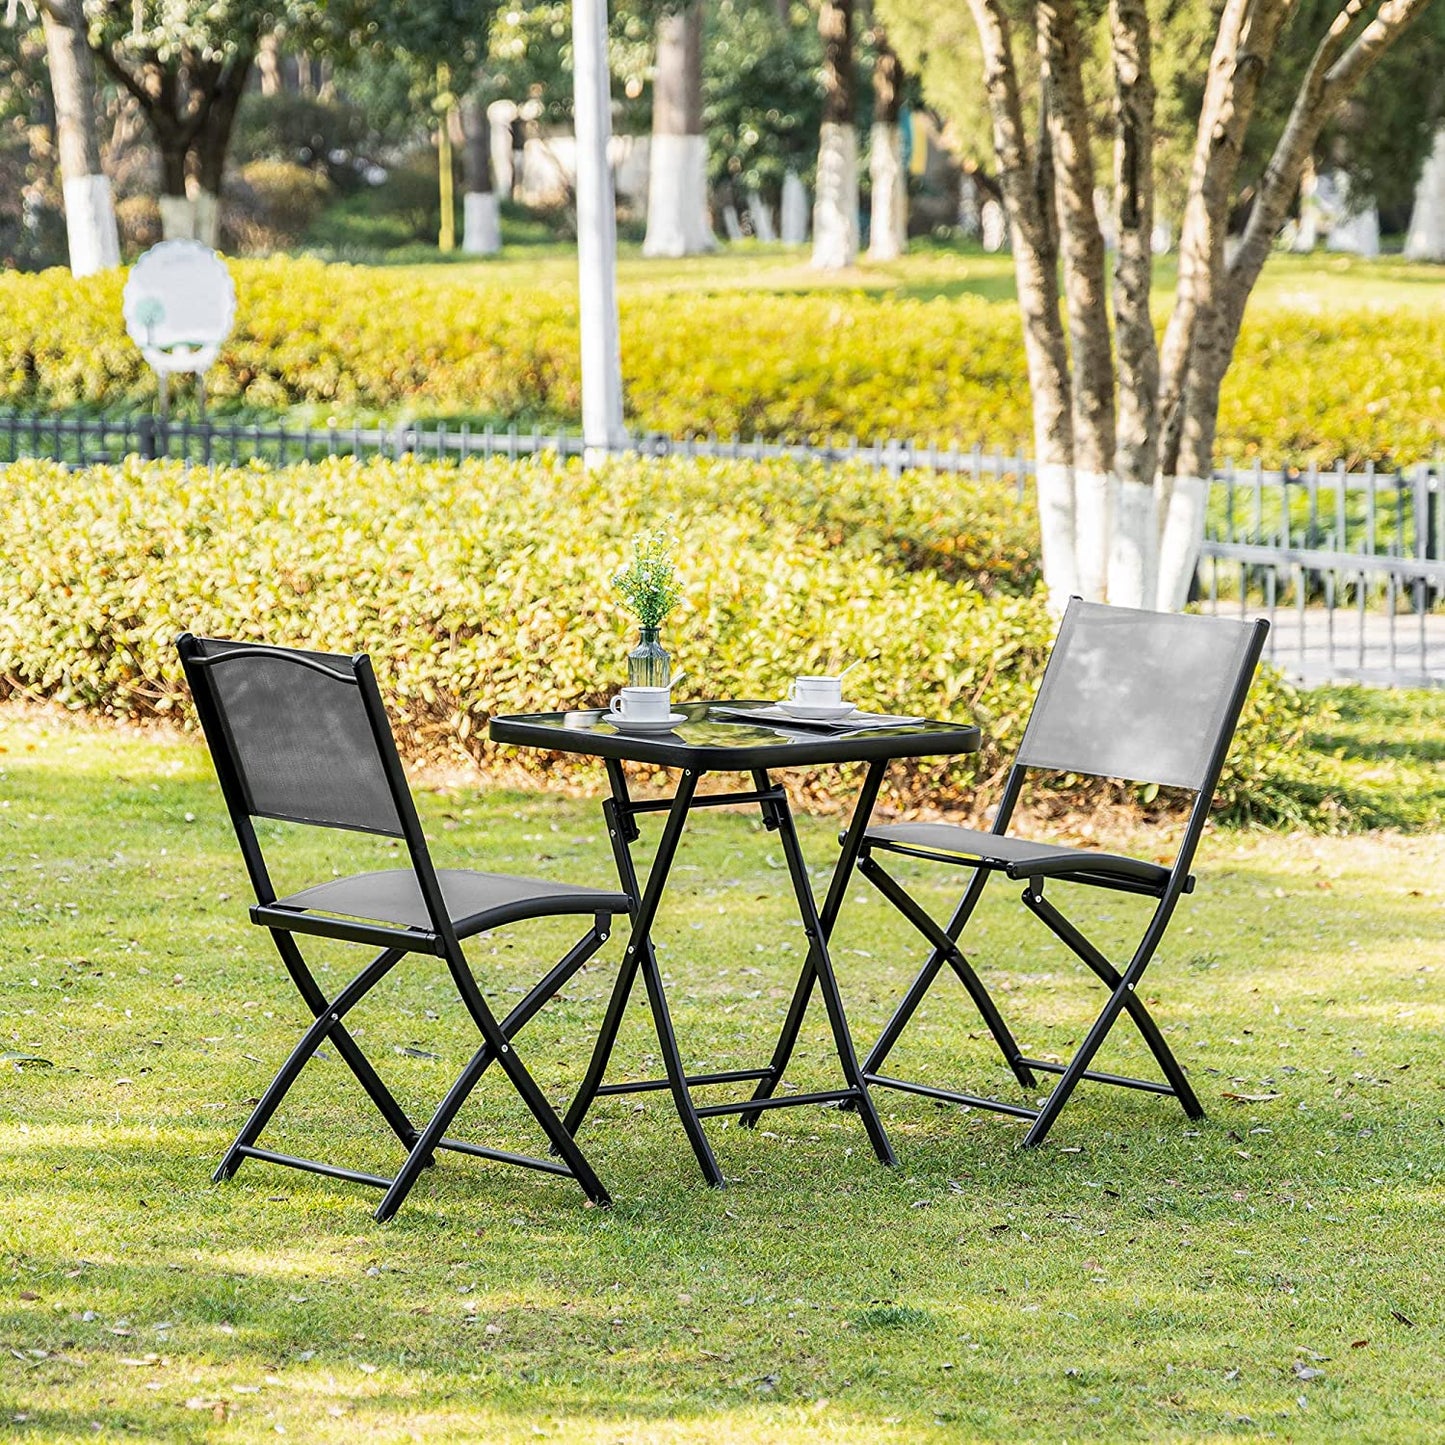 Outsunny 3 Pieces Garden Bistro Set, Folding Patio Table and 2 Chairs, Outdoor Furniture Set for Backyard and Porch, Black